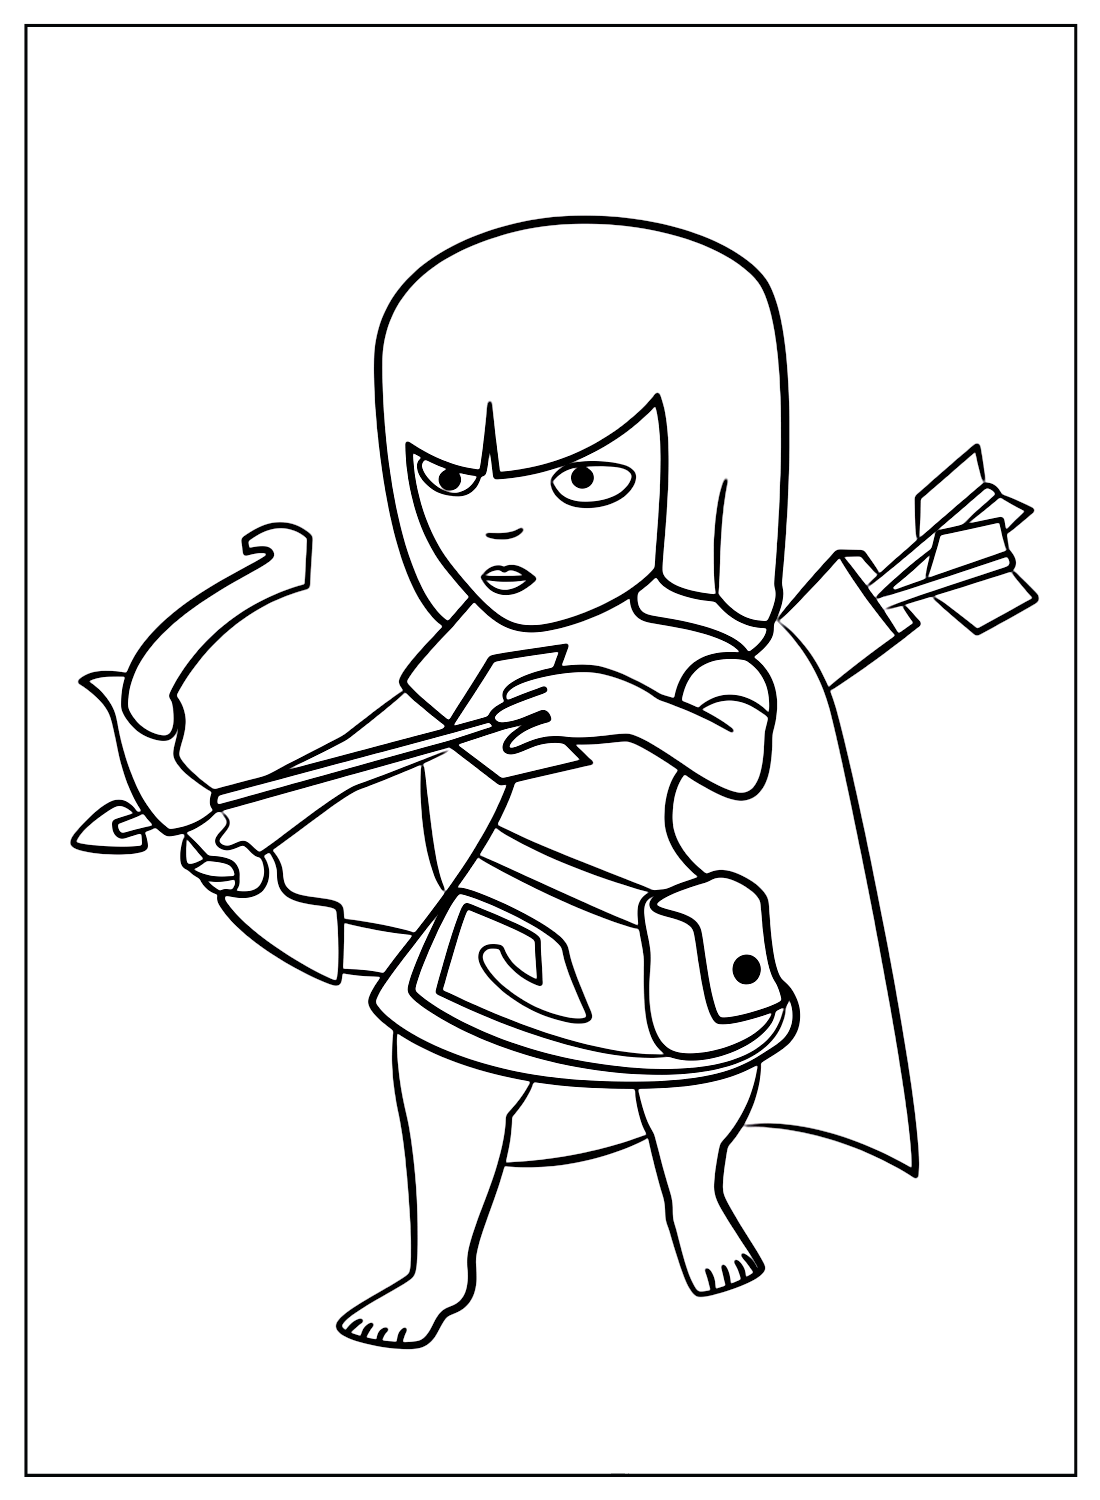 Clash Of Clans Archer Queen Coloring Pages from Clash of Clans